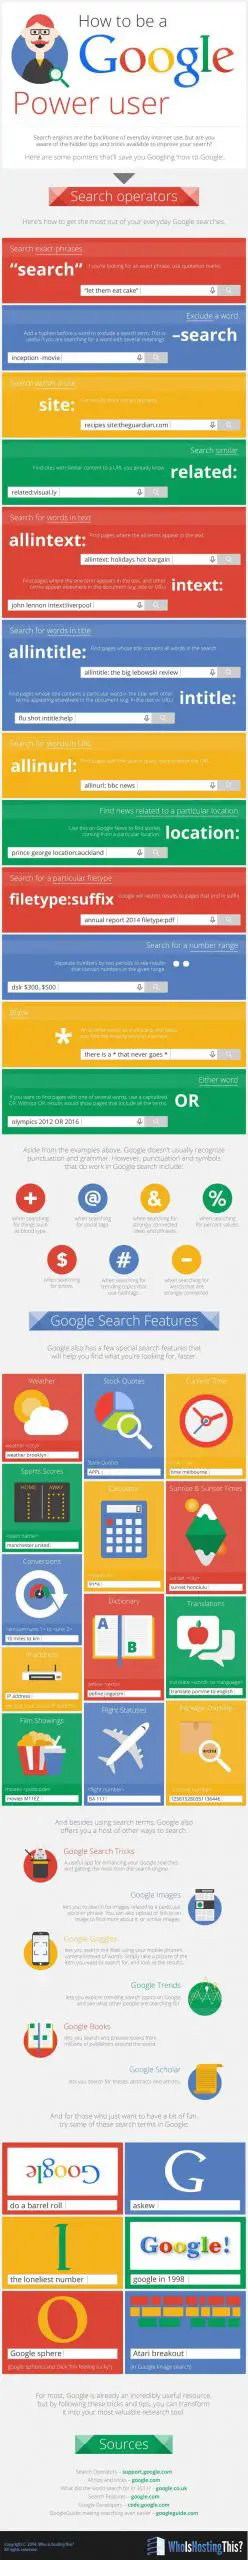 How To Be A Google Power User Infographic